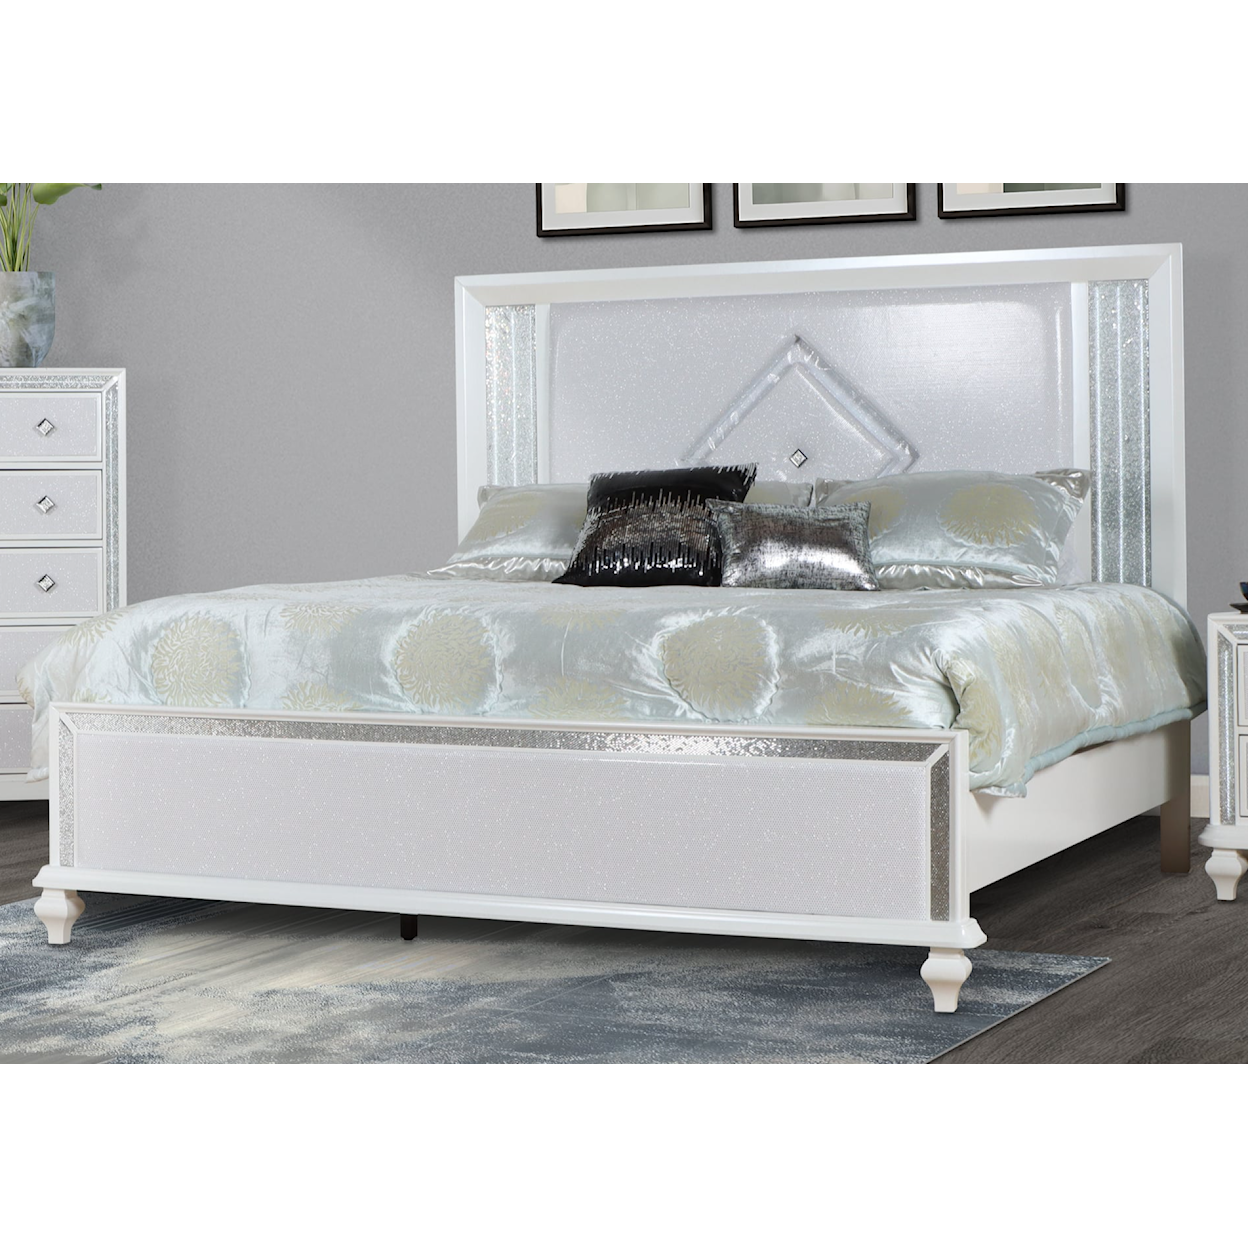 New Classic Stardust King Bed